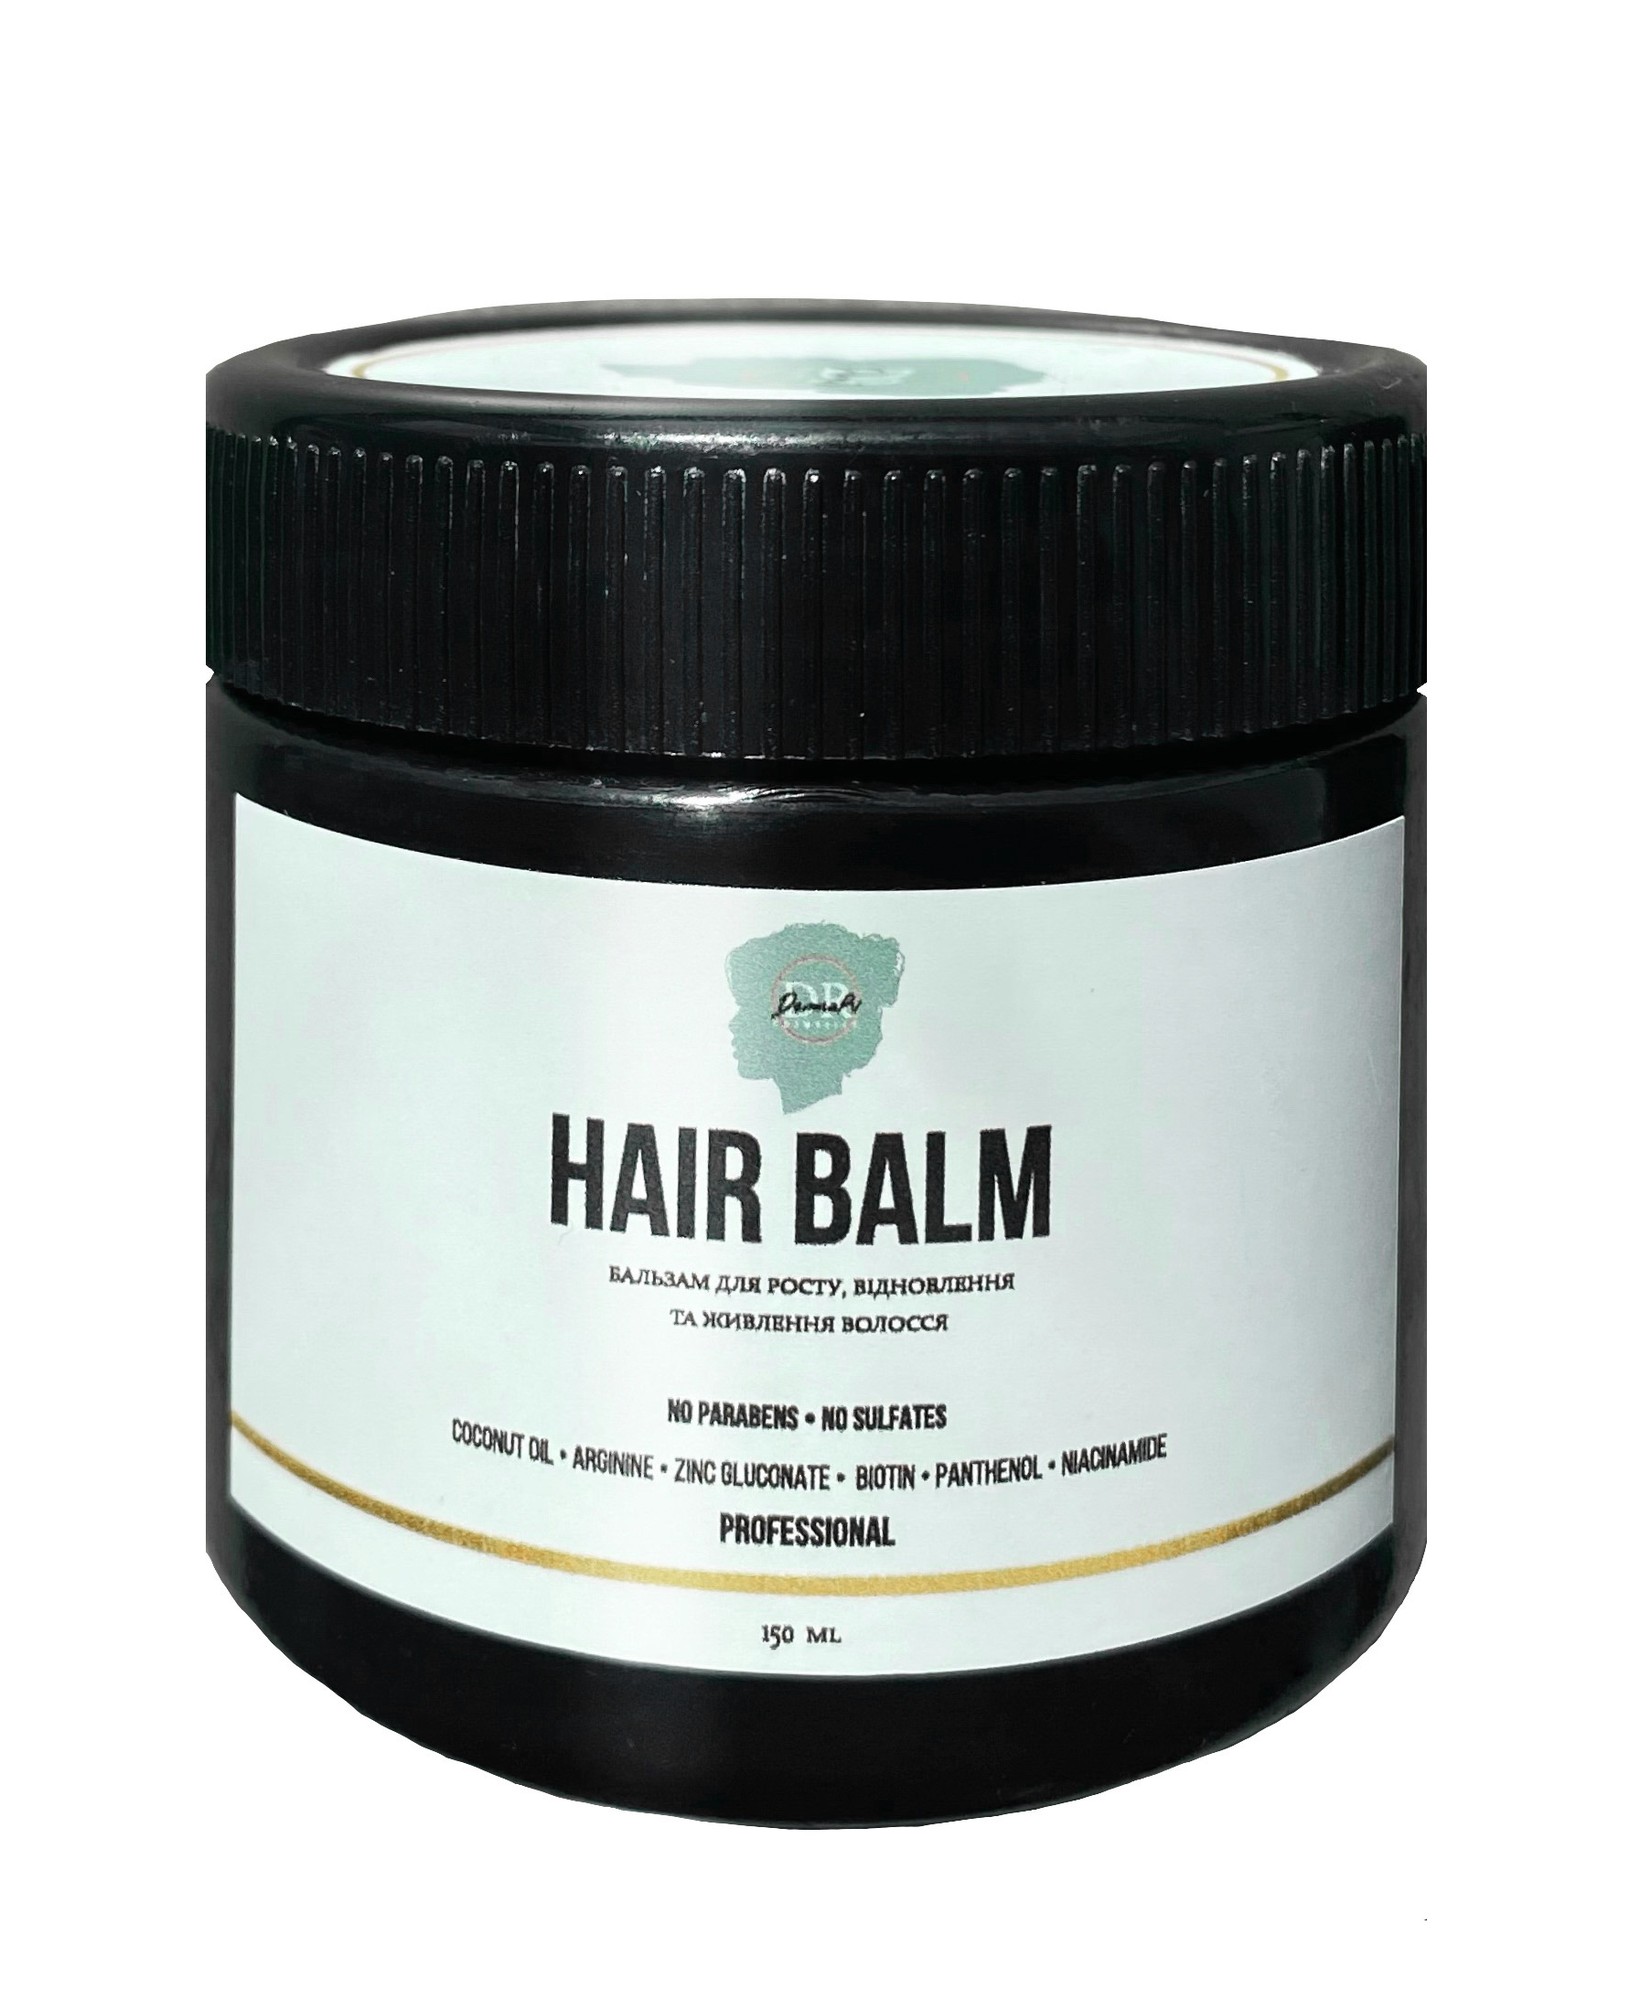 Hair balm for hair growth, restoration and nutrition, 150 ml - 17112 from  DermaRi COSMETICS with donate to u24